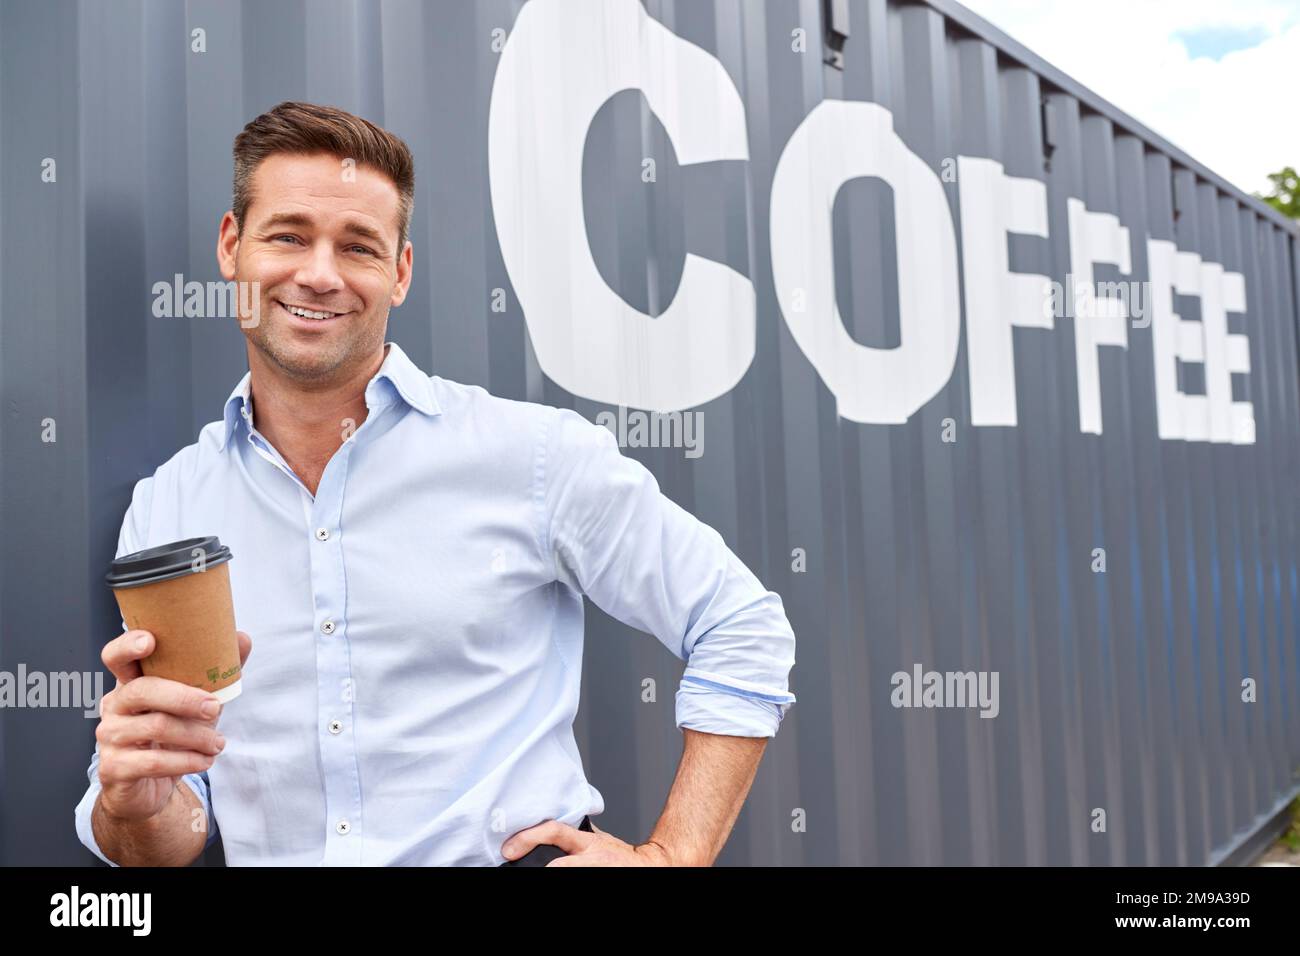 Portrait Of Male Owner Of Coffee Shop Or Distribution Business Standing By Shipping Container Stock Photo